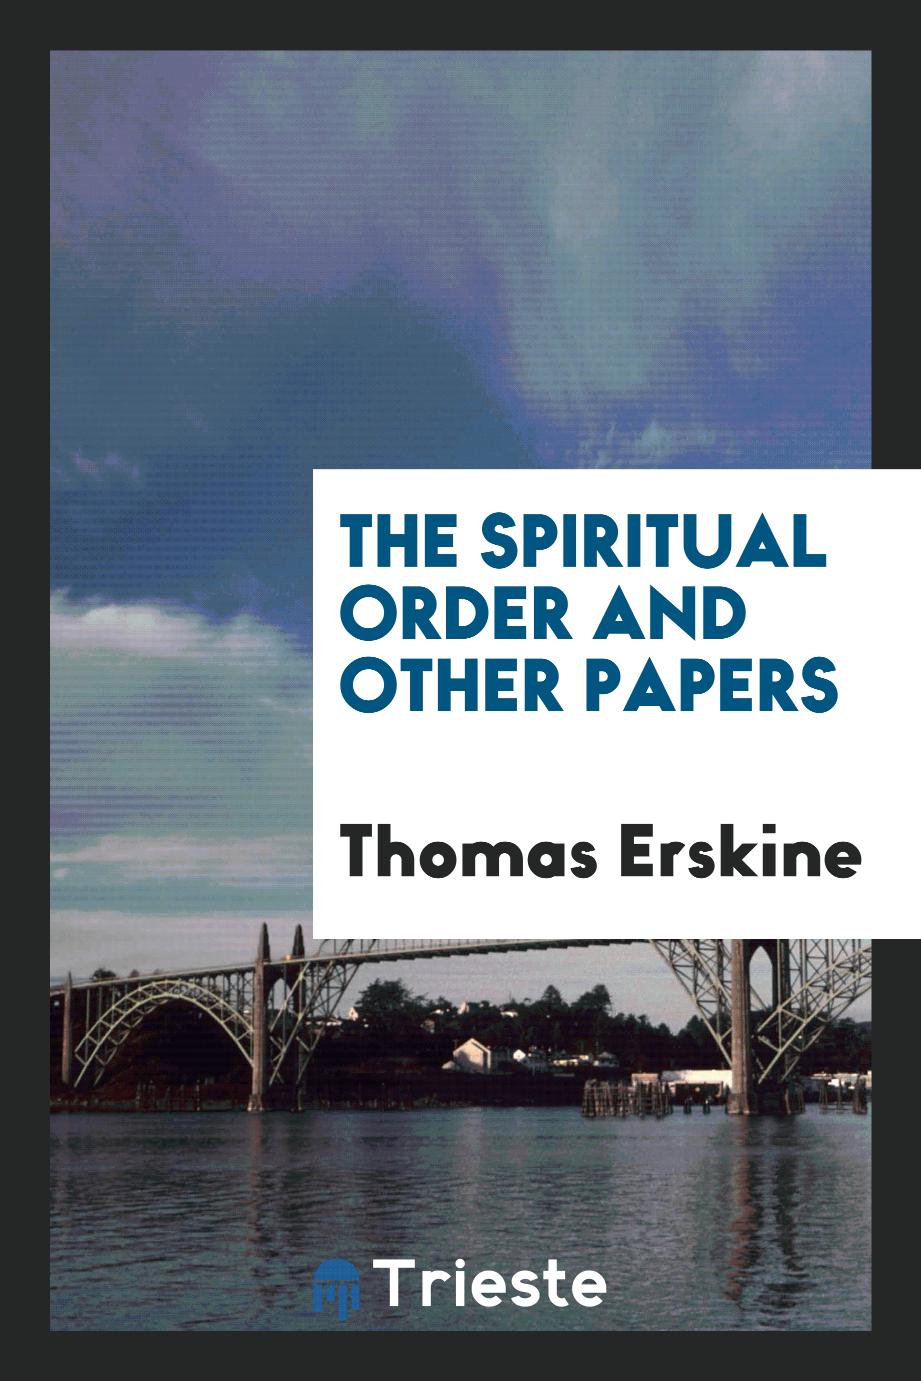 The spiritual order and other papers